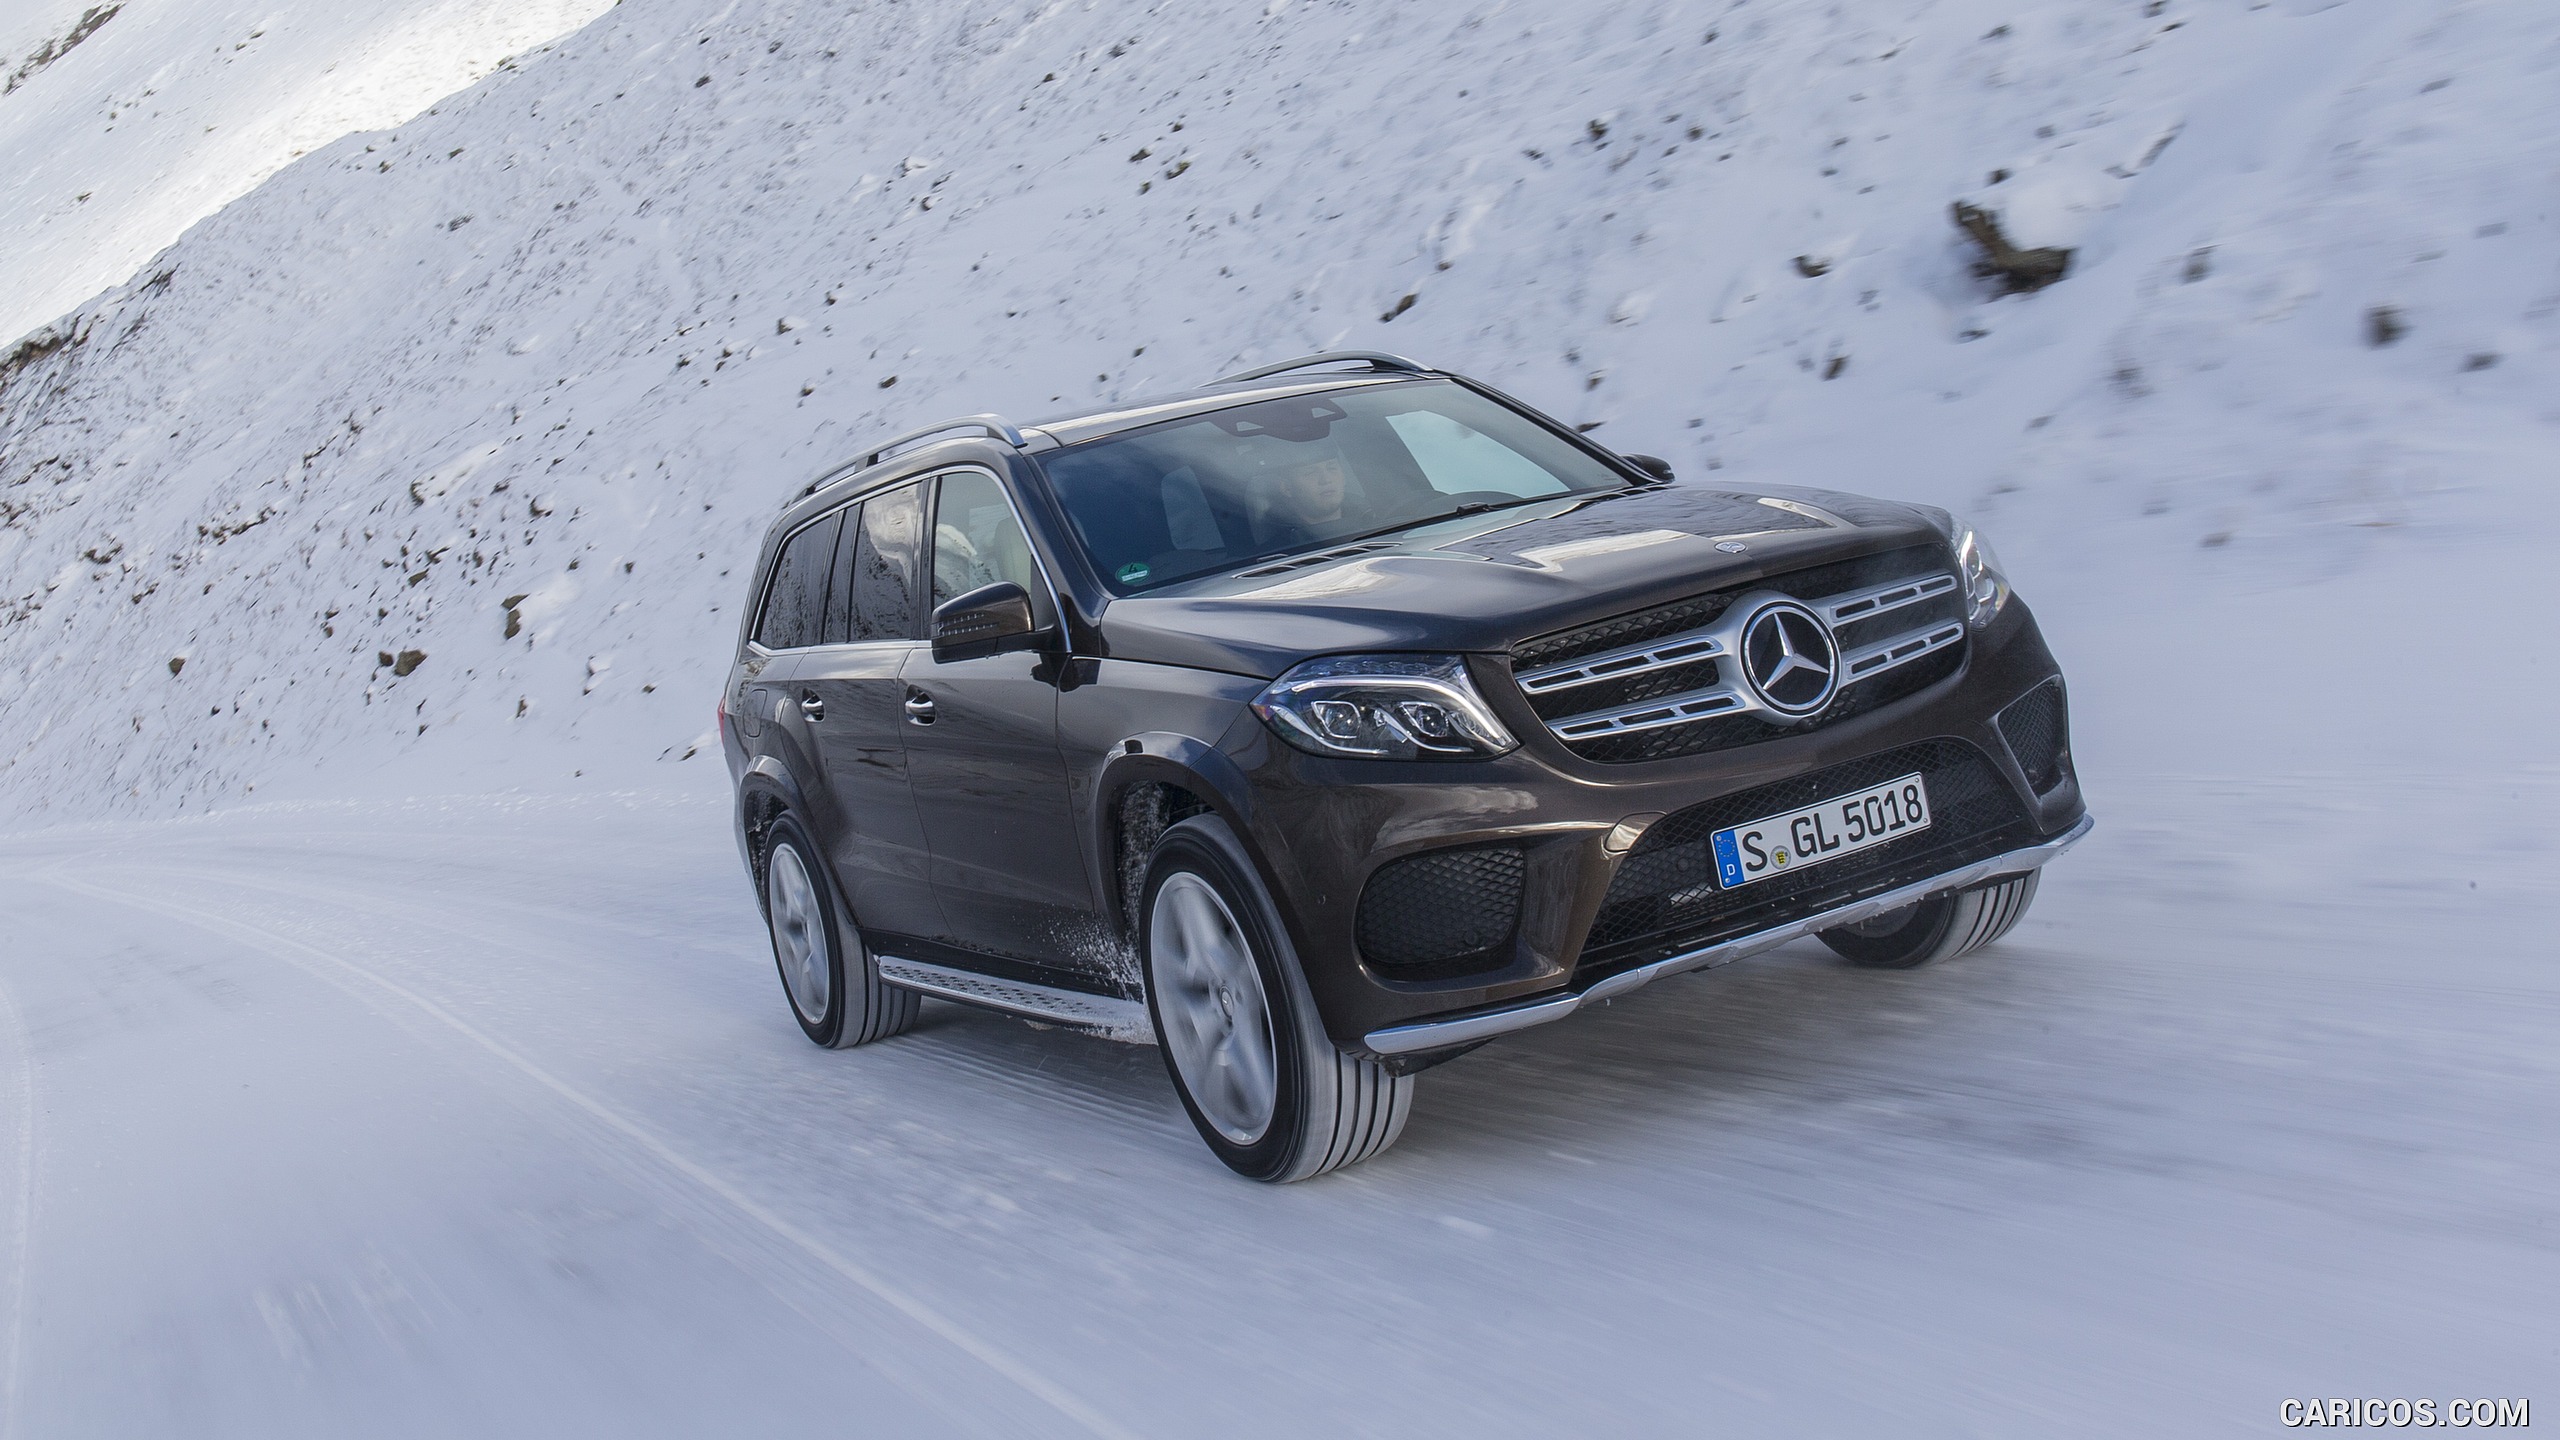 2017 Mercedes-Benz GLS 350d 4MATIC AMG Line in Snow - Front, #179 of 255